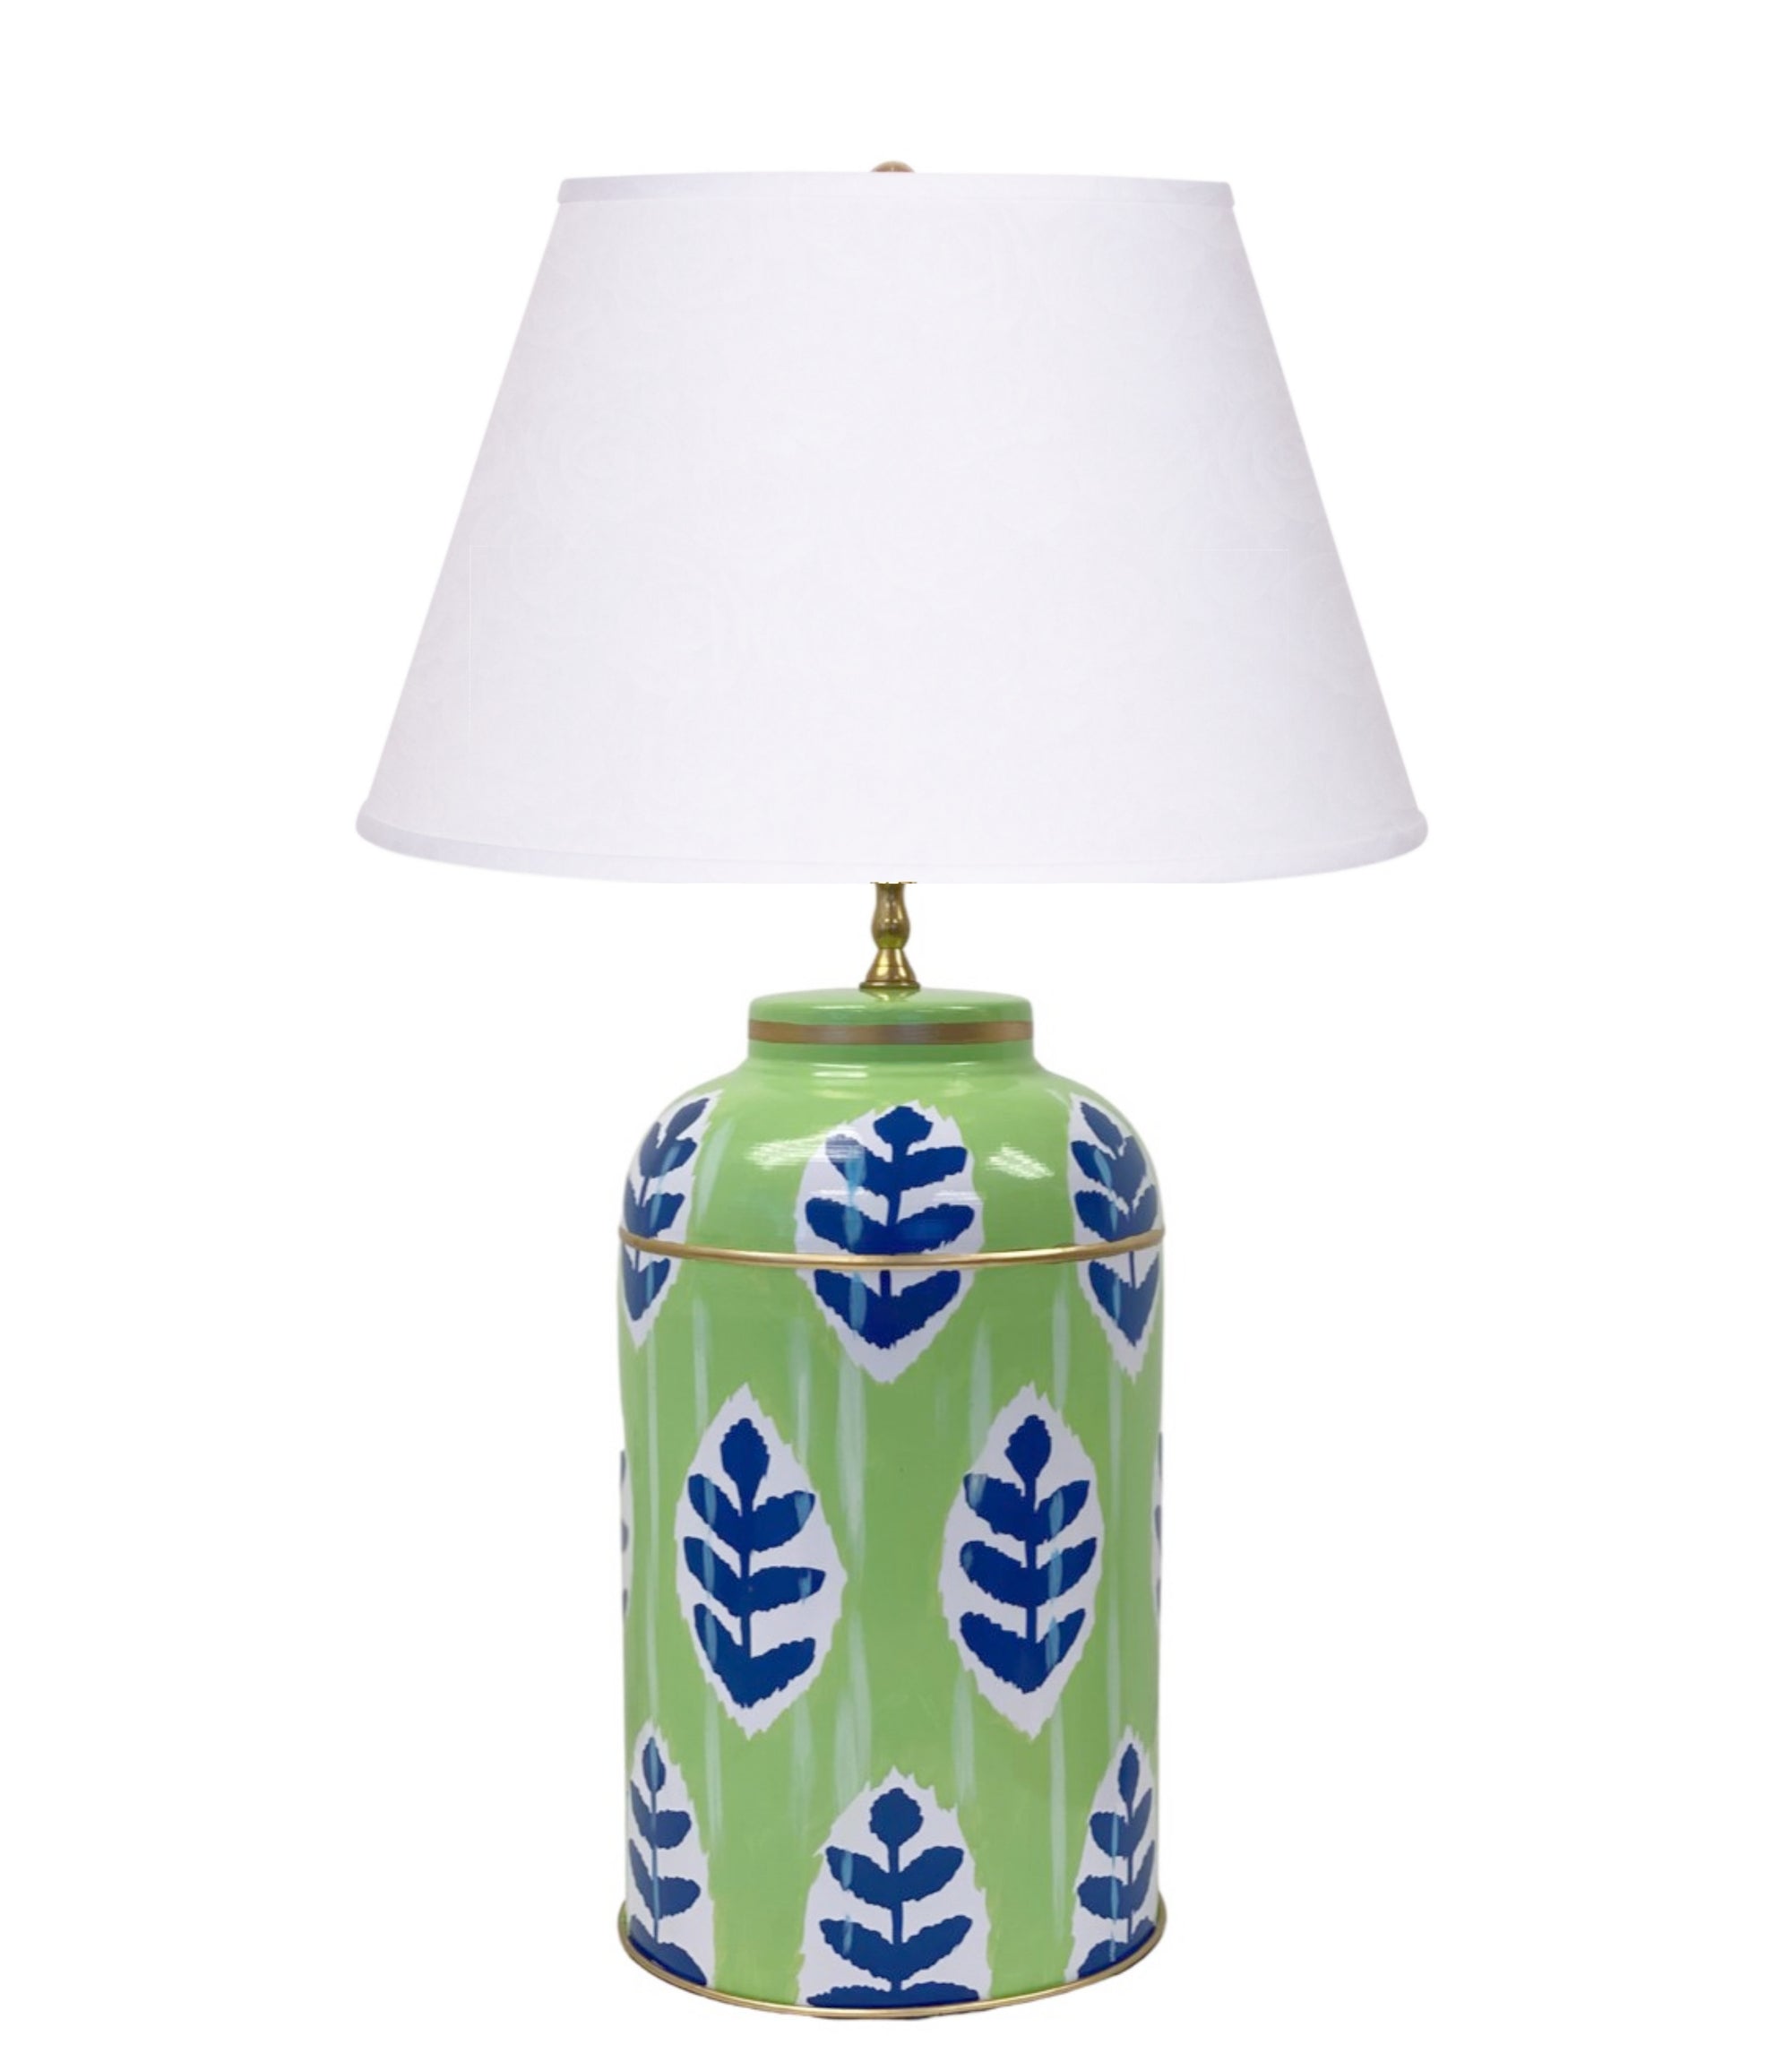 Dana Gibson Louvre Ikat Tea Caddy Lamp in Green with White Linen Shade